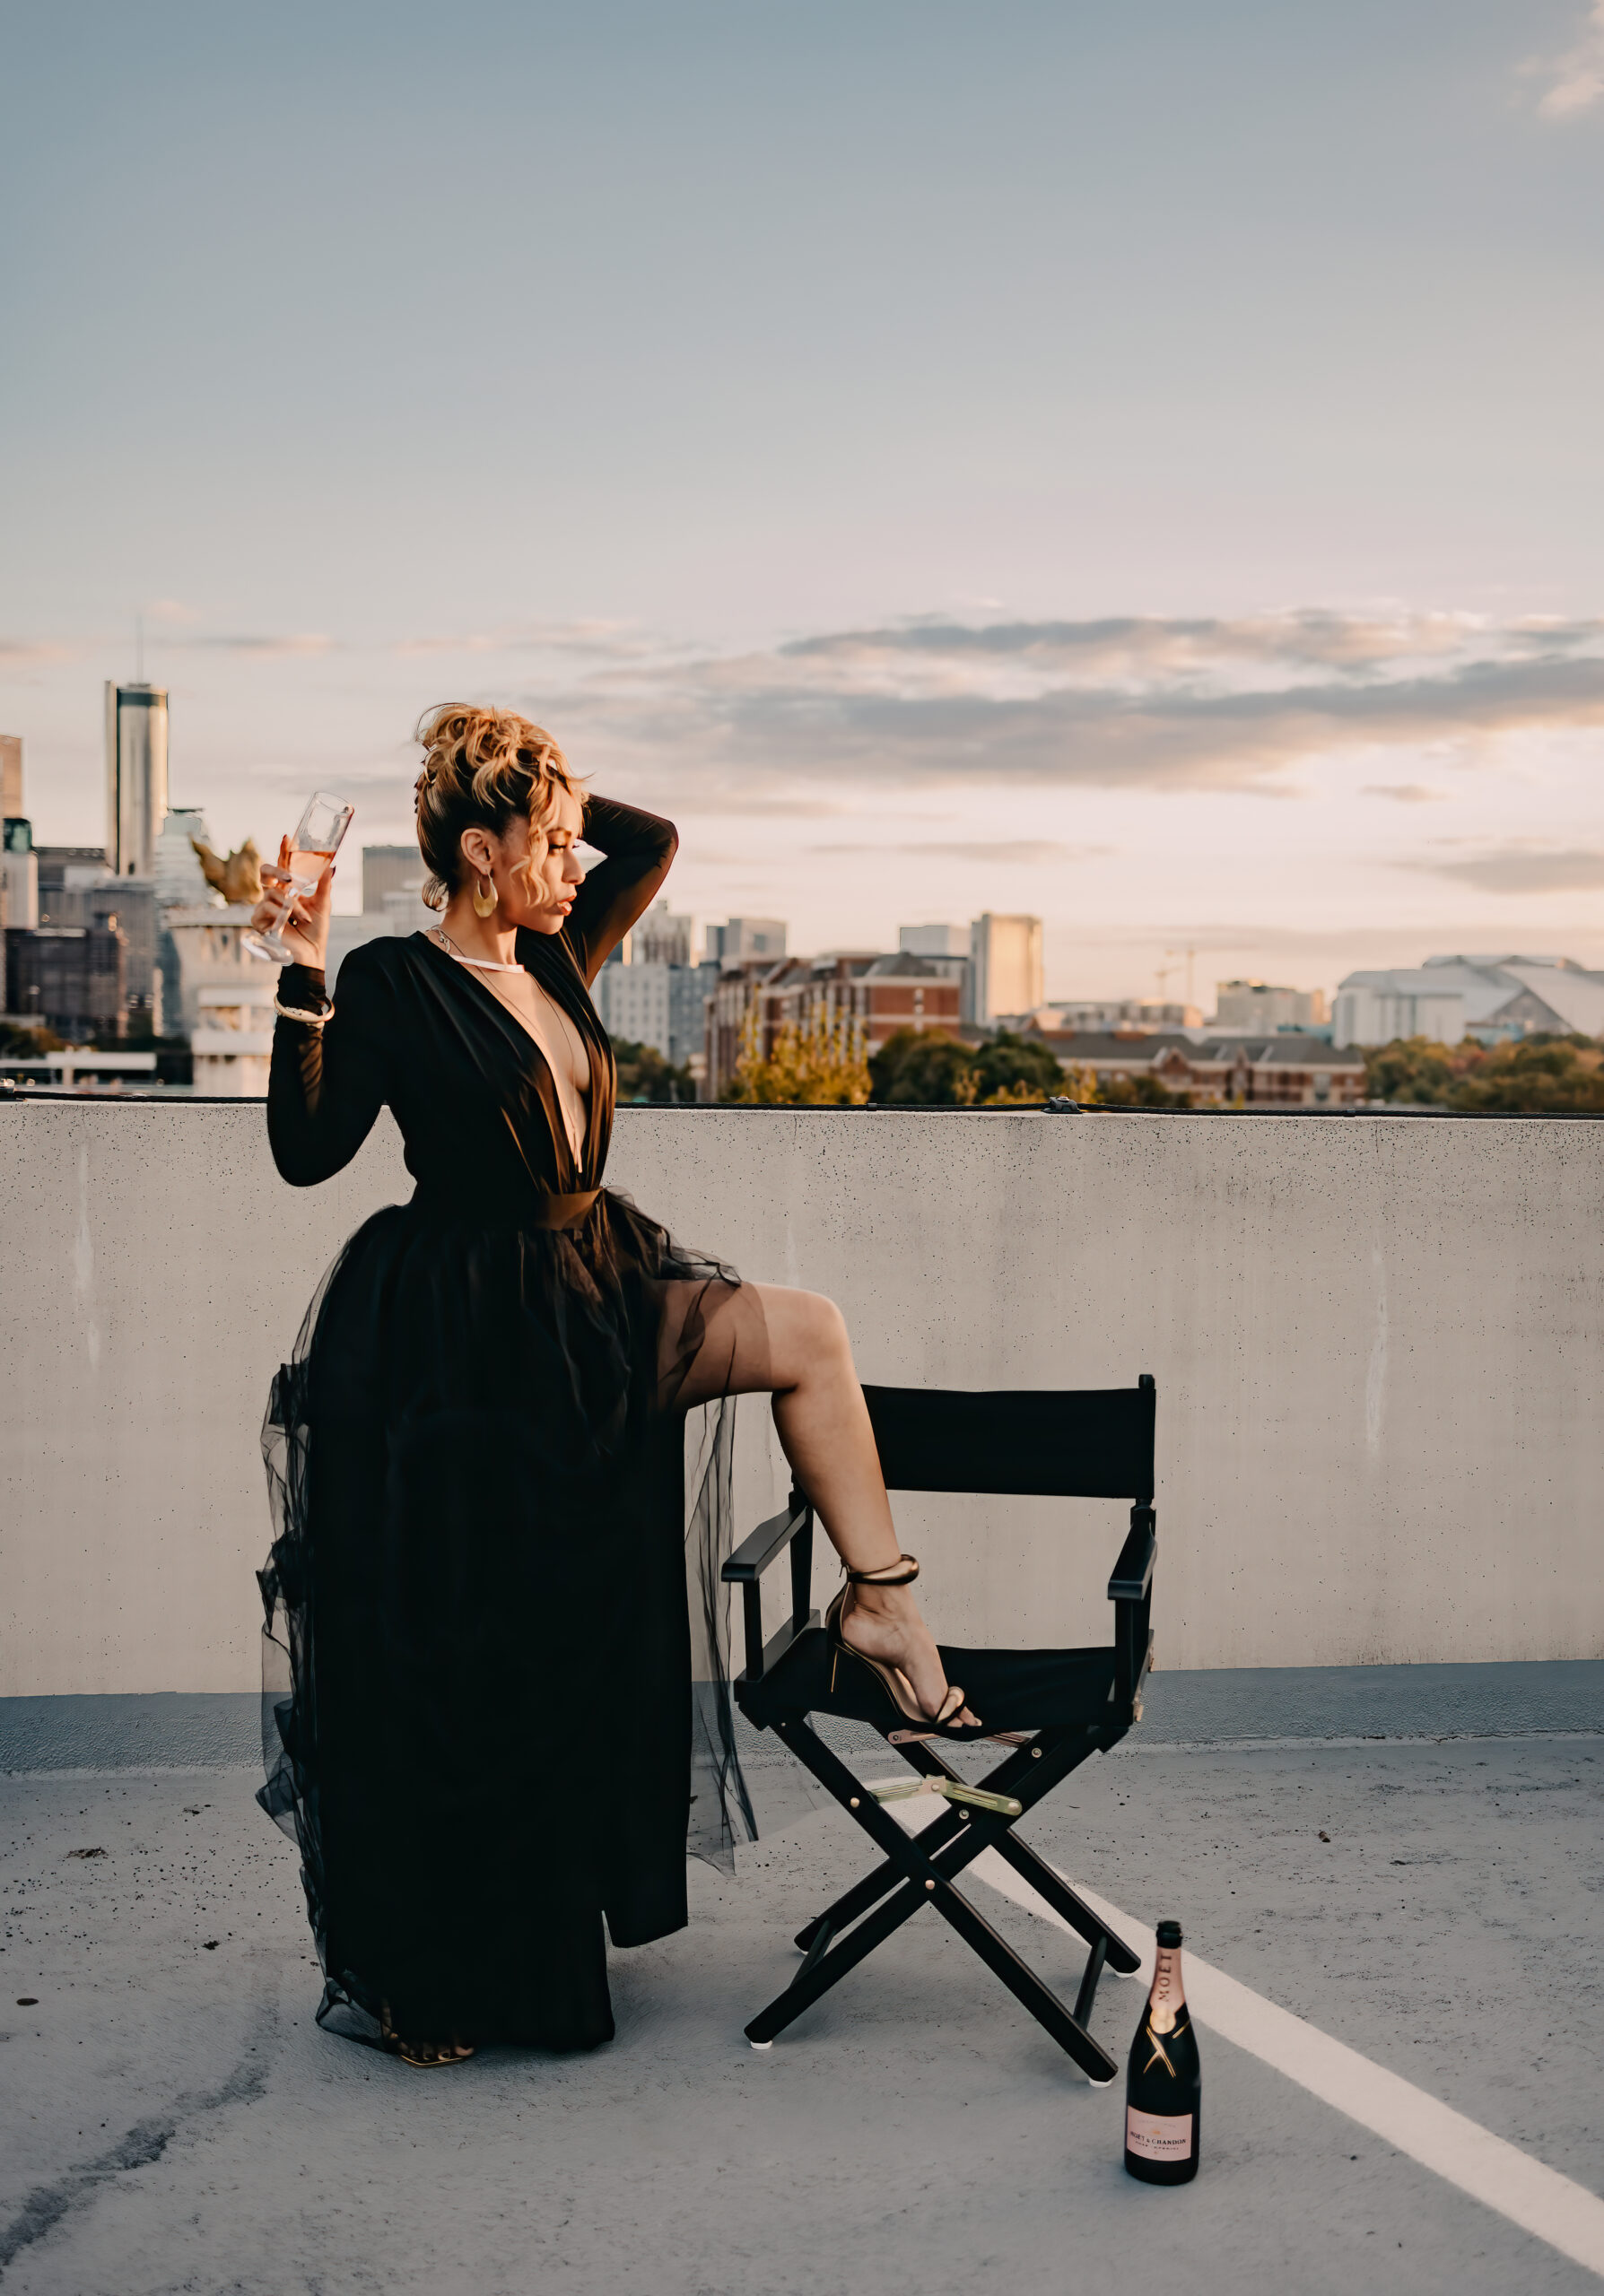 Breathtaking Locations for Your Next Photoshoot in and around Atlanta